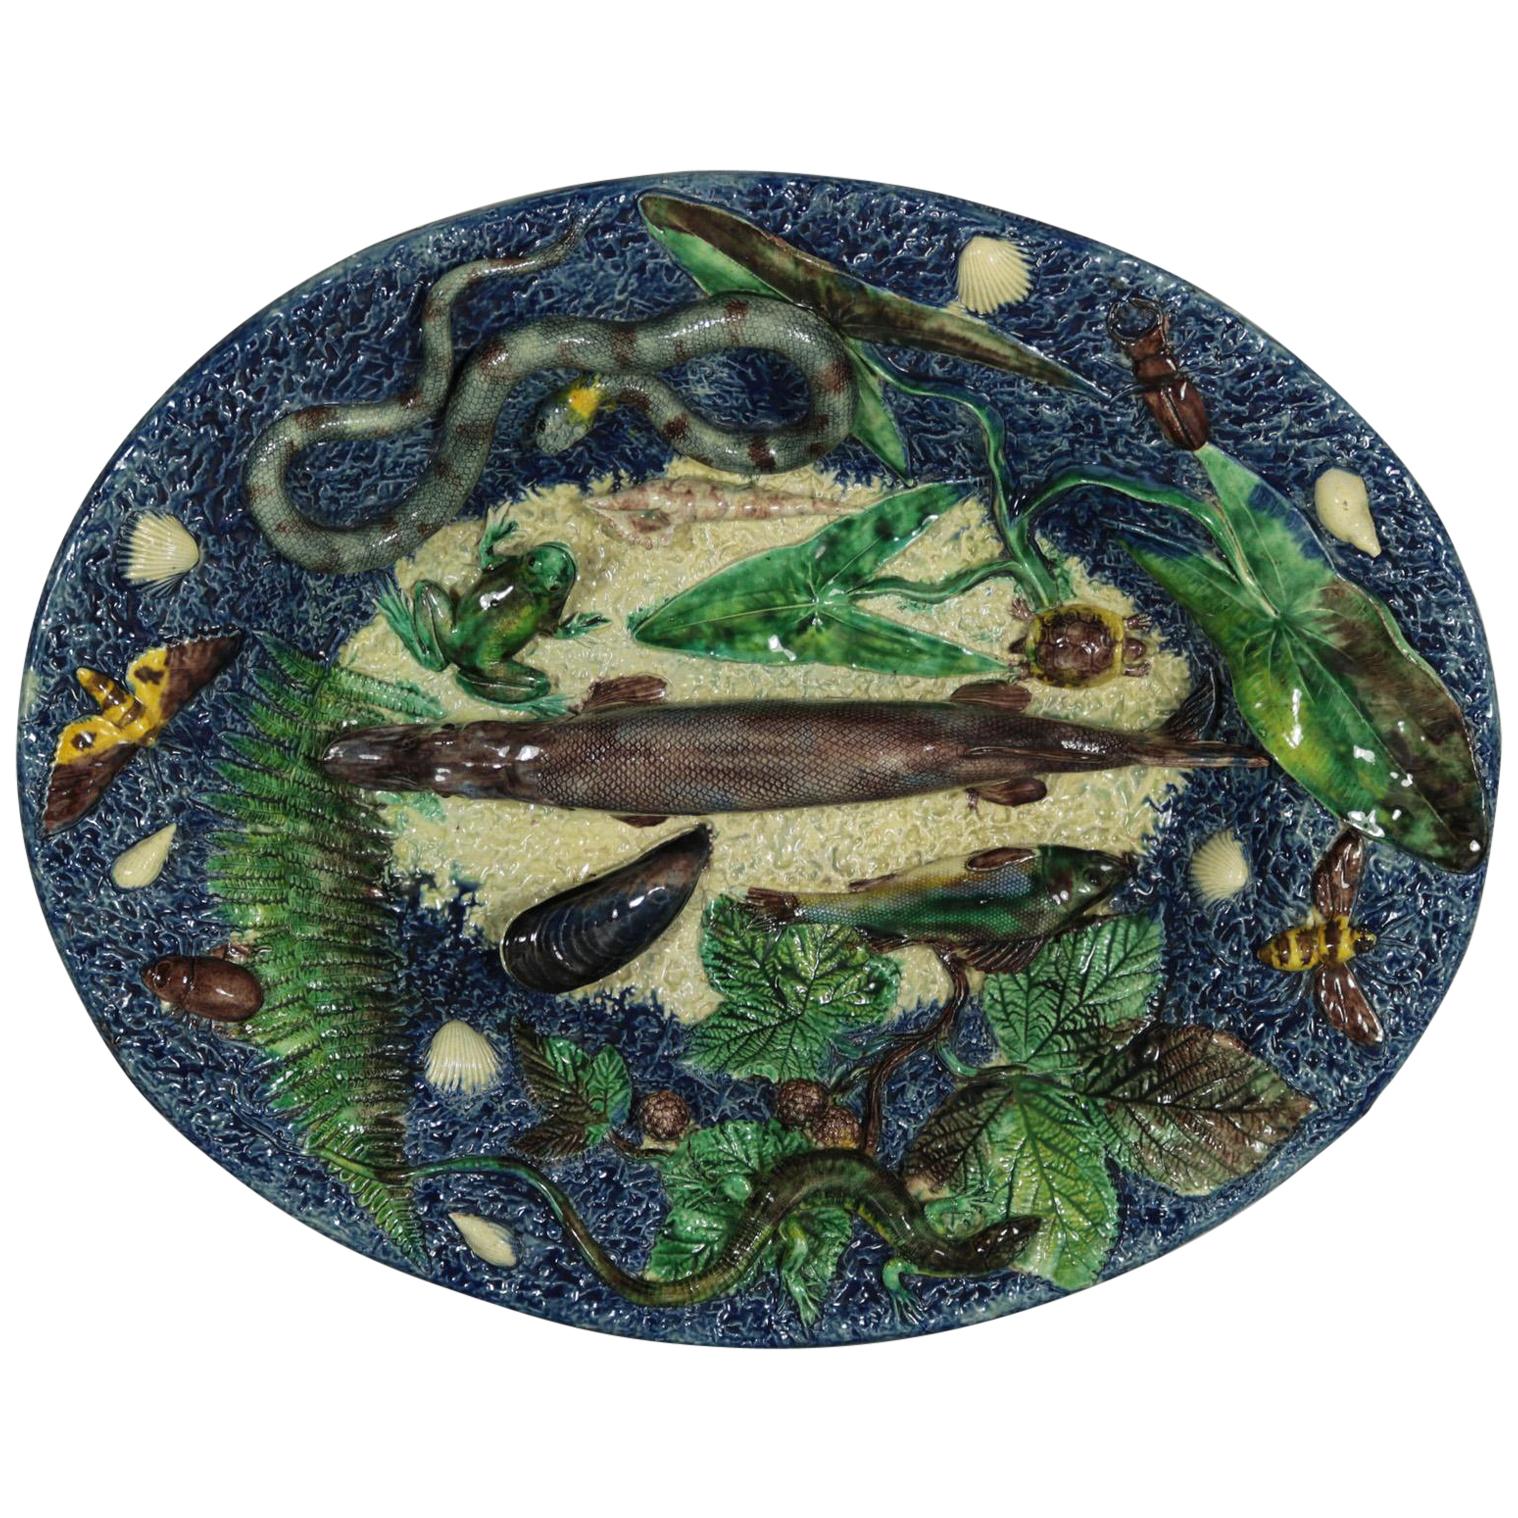 What is Palissy majolica?